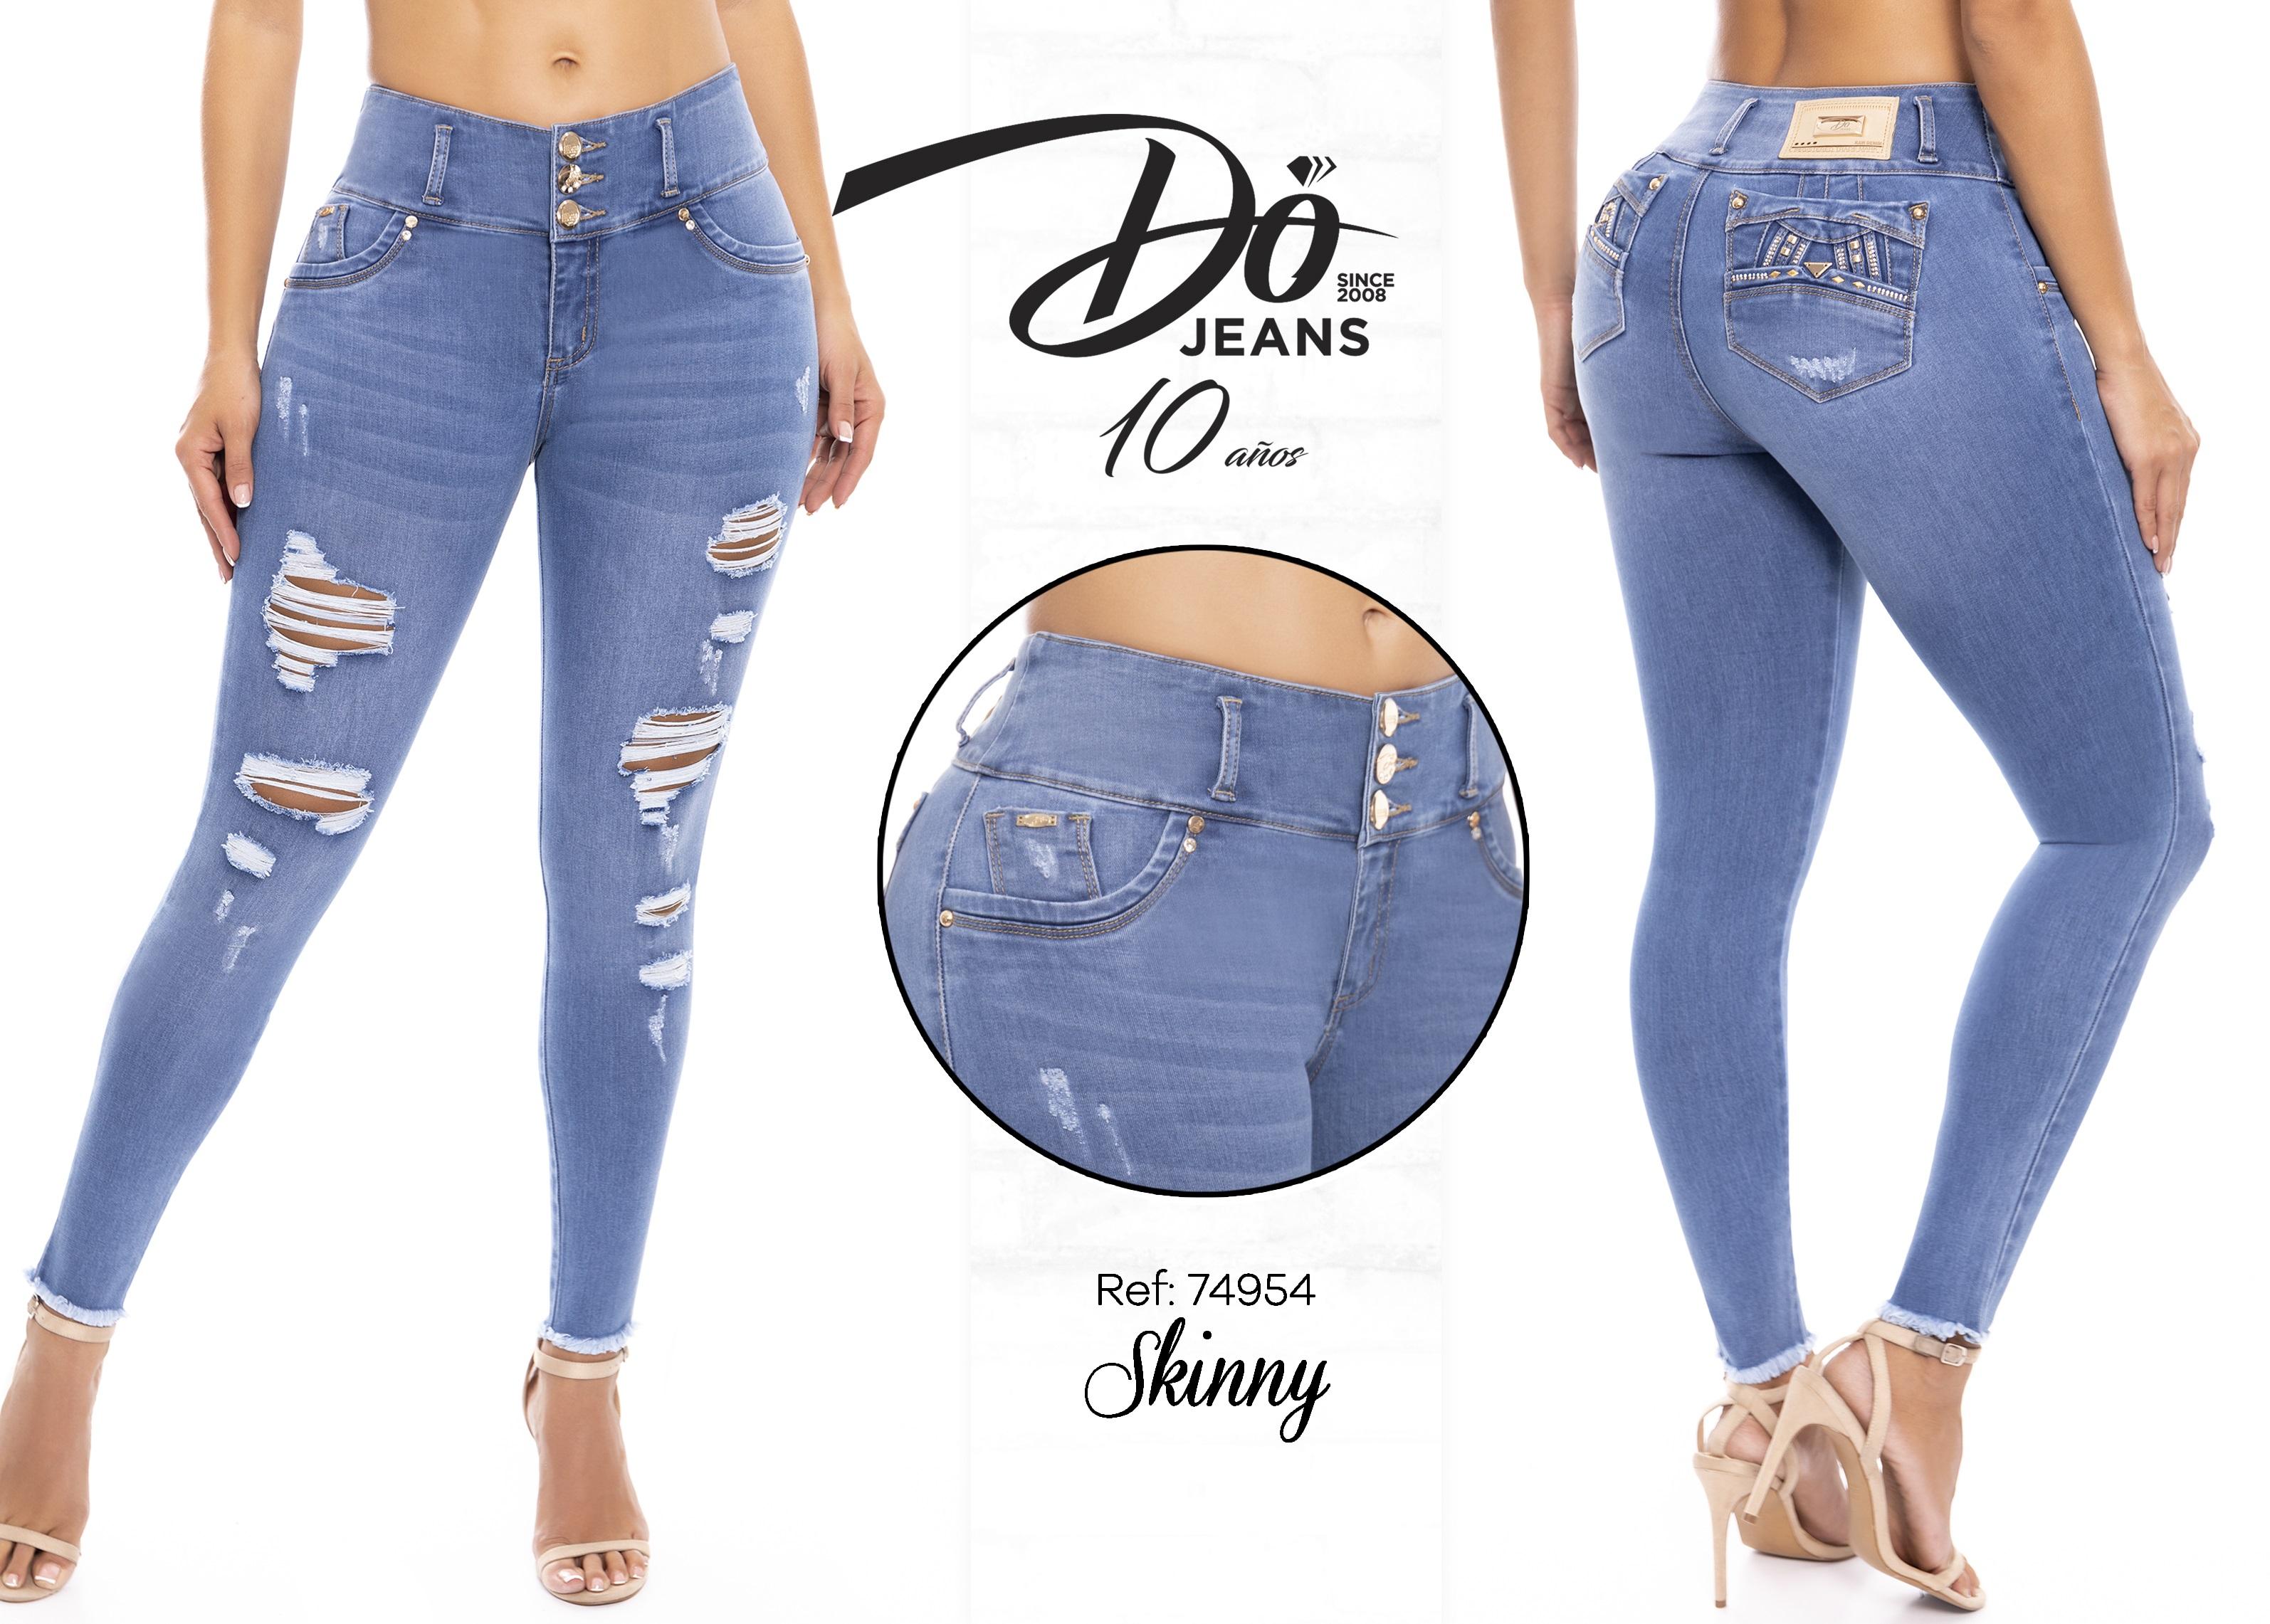 Jeans Levantacola Colombiano - Ref. 248 -74954 D